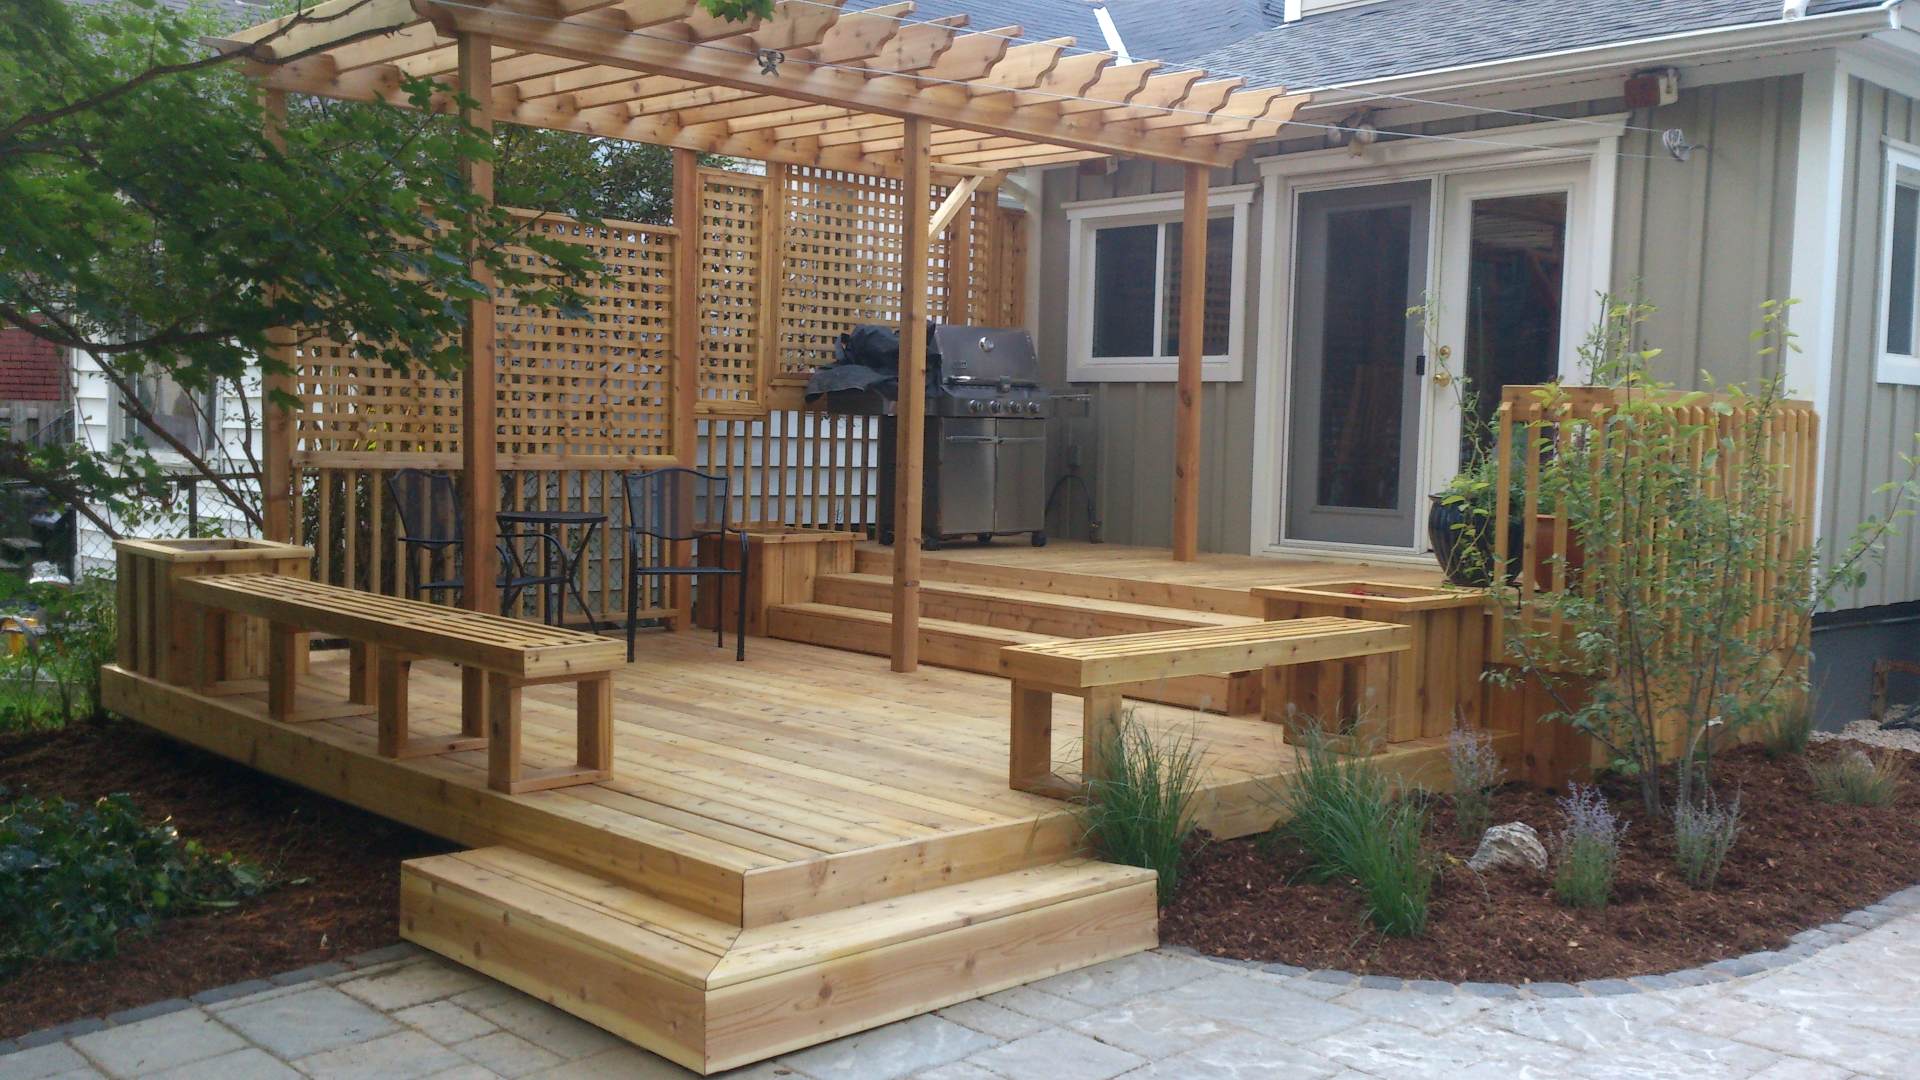 Deck work and backyard renovation project in London, Ontario: woodwork, landscaping and interlock brick work.